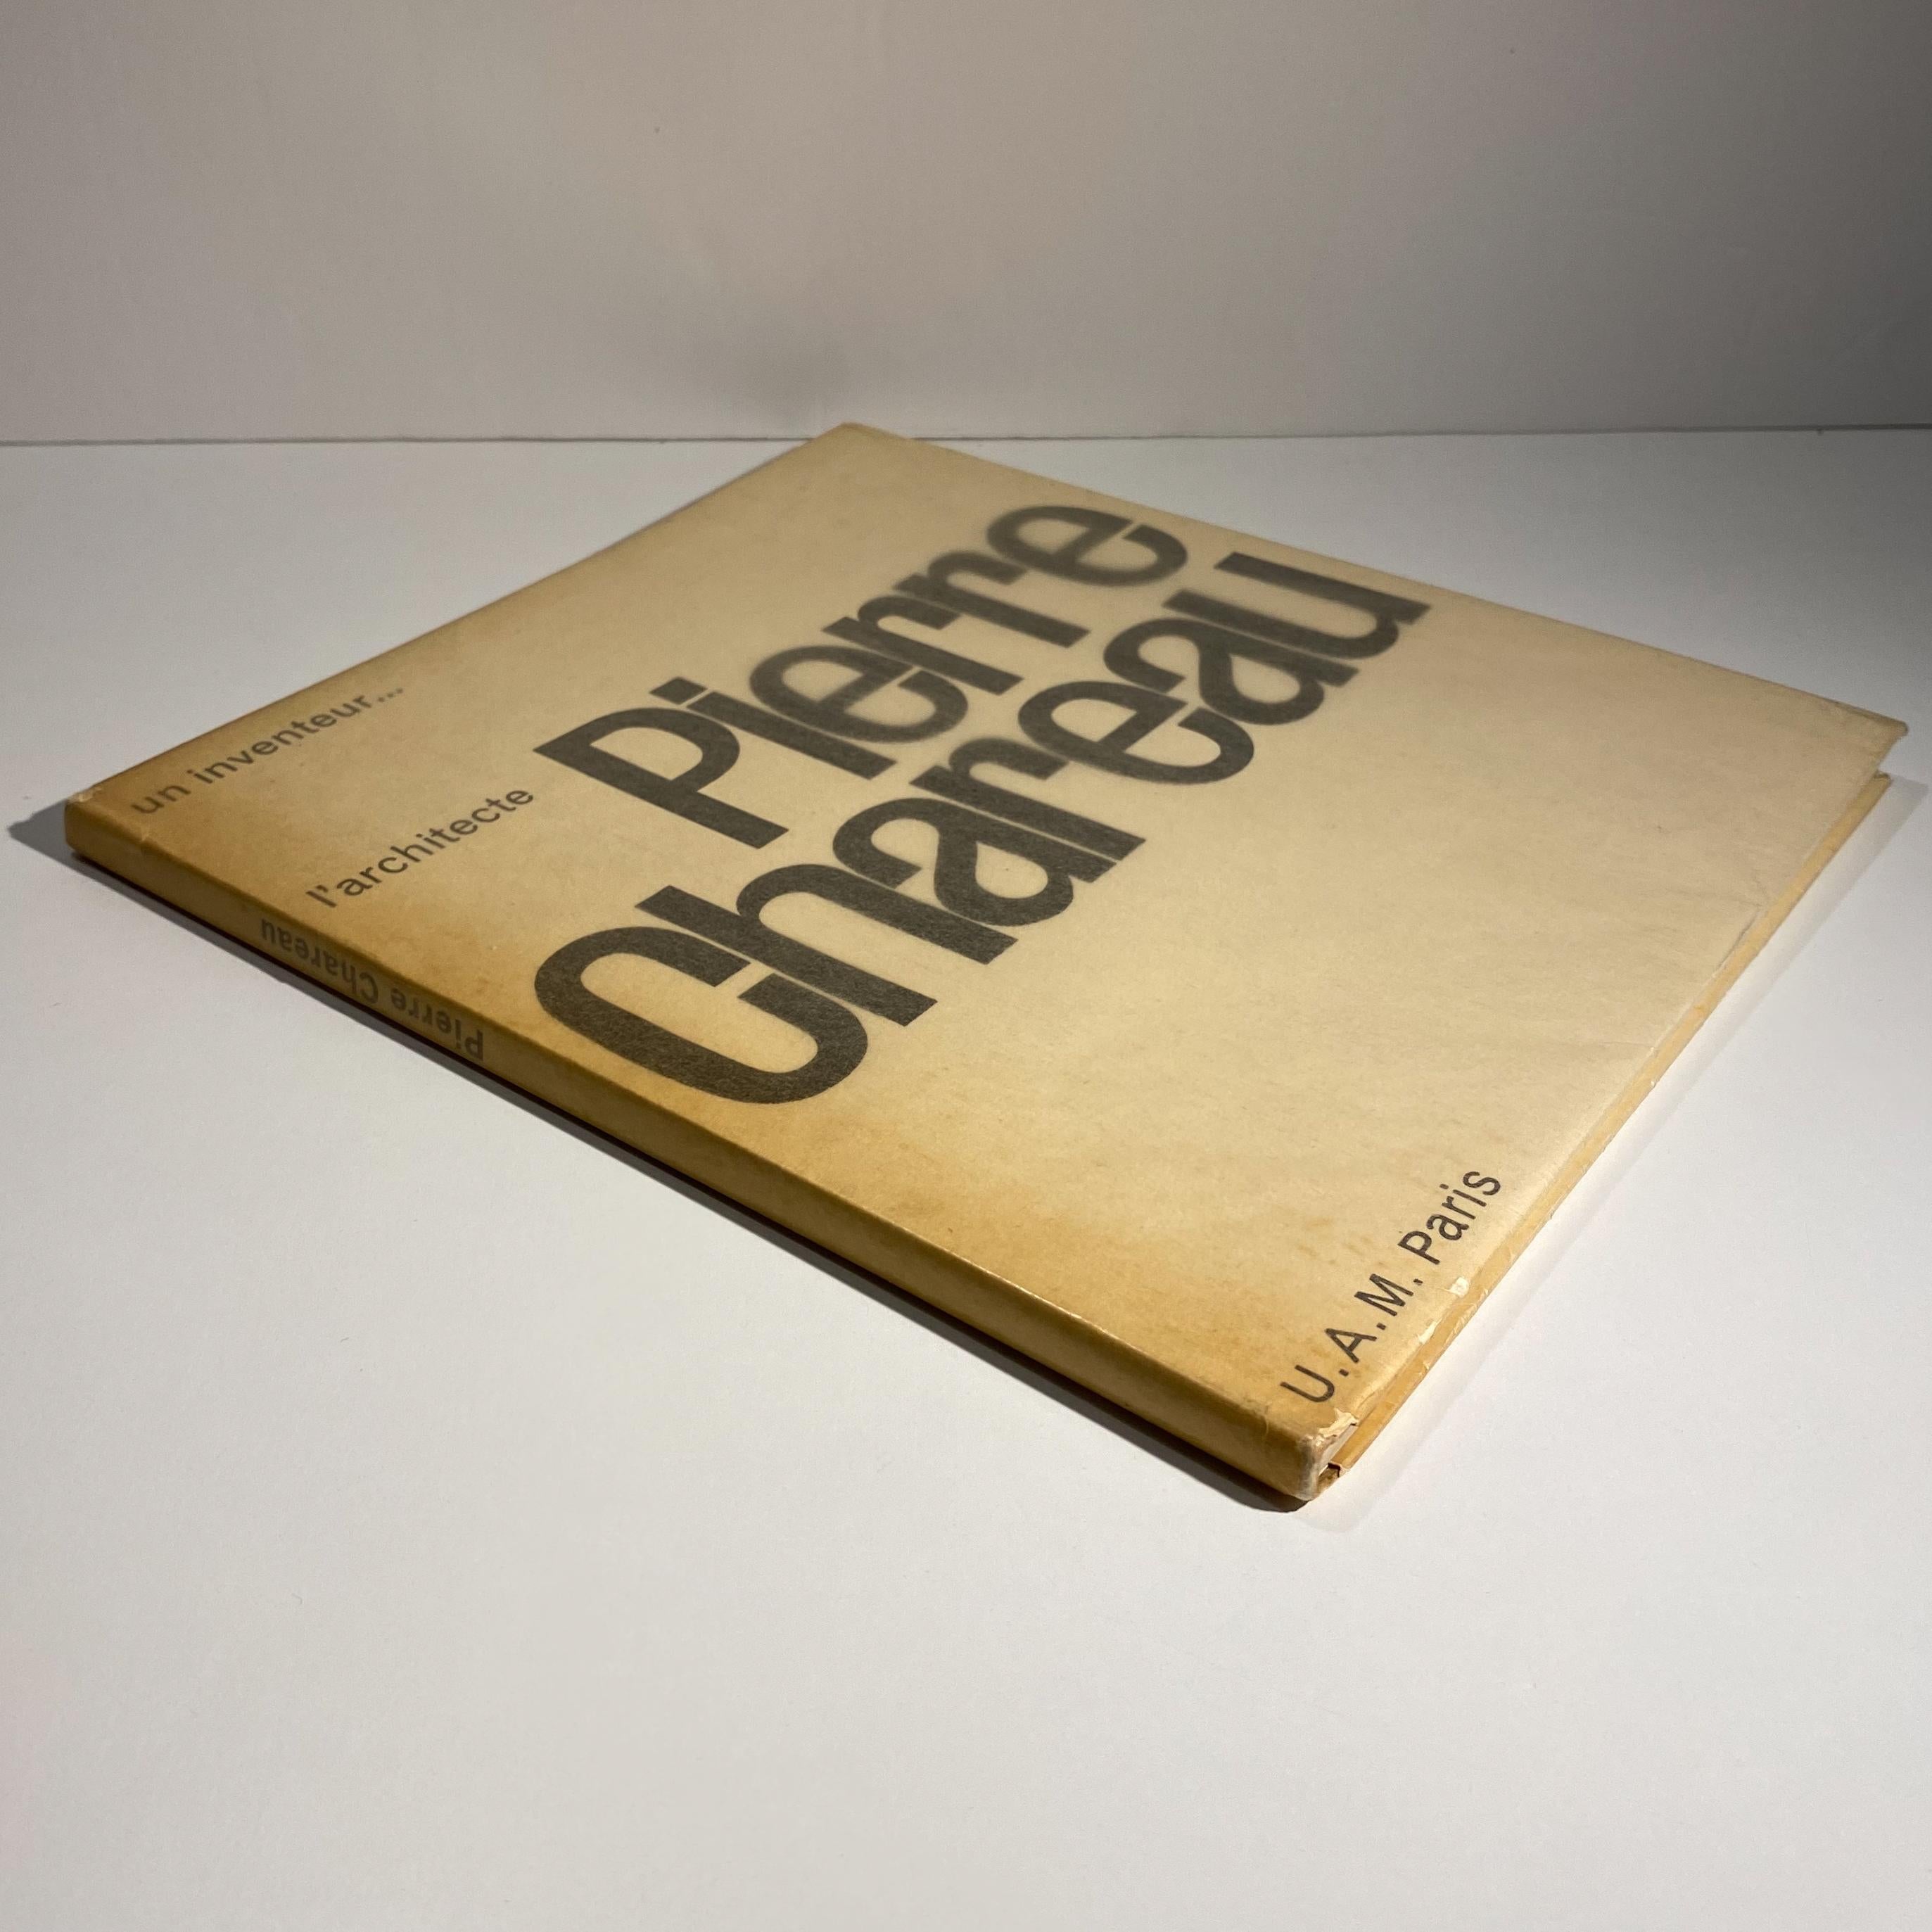 Monograph on celebrated modernist architect and designer Pierre Chareau, published by Editions du Salon des Arts Managers in Paris, 1954. With text by Rene Herbst, preface by Francis Jourdain, and documentation from Madame Pierre Chareau. Numerous